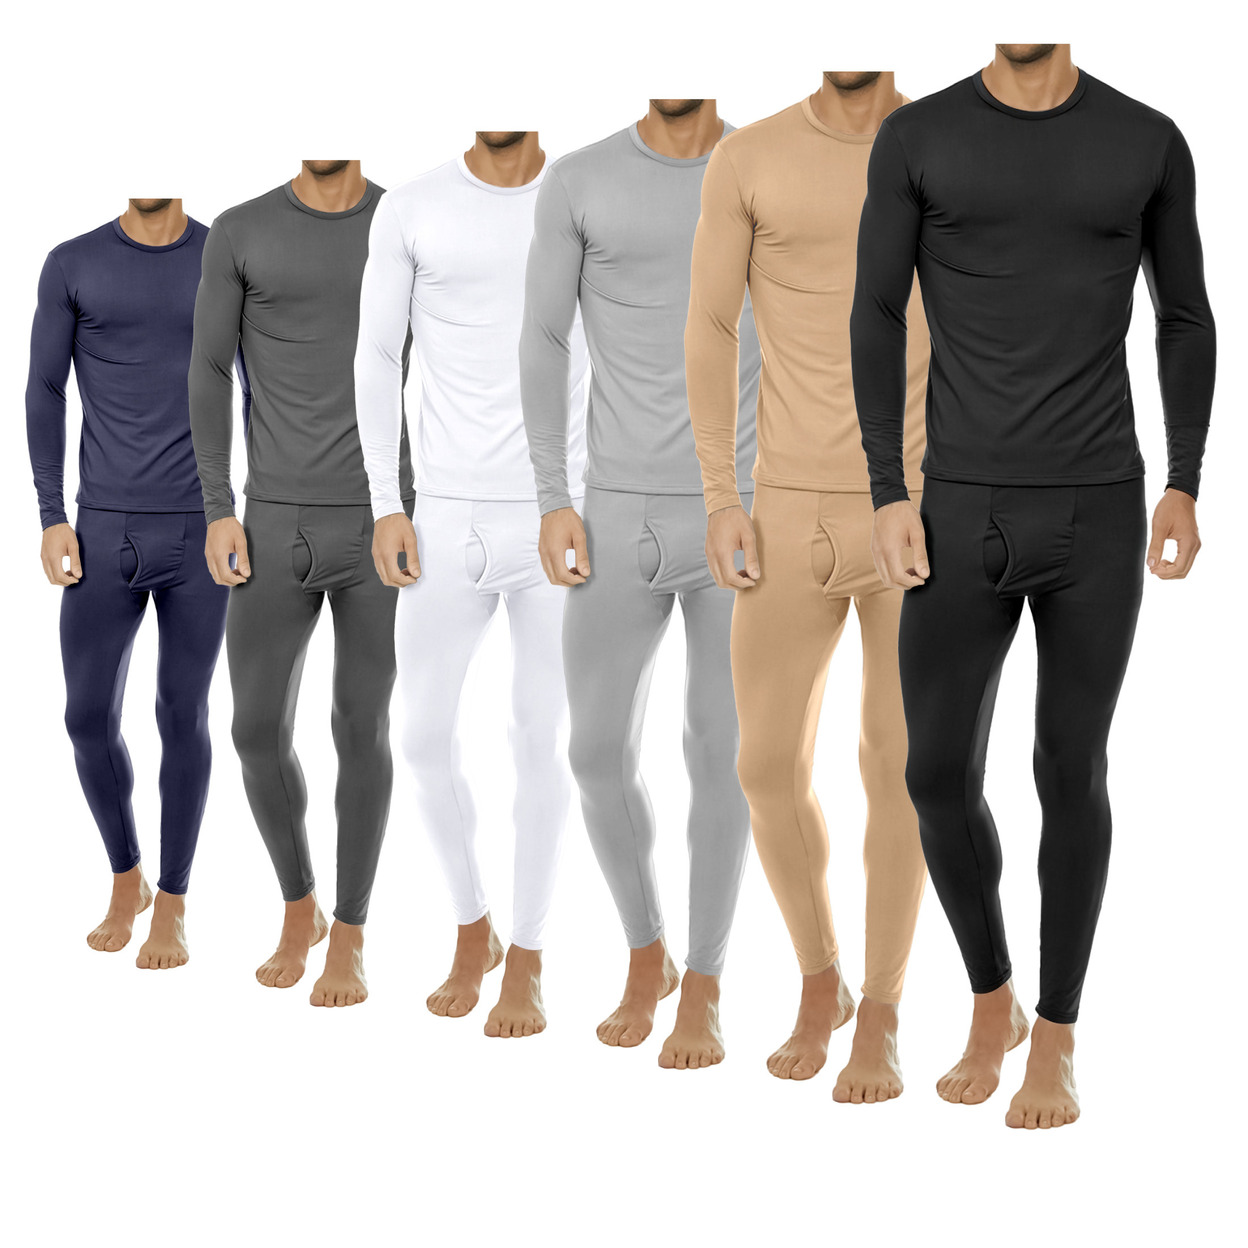 2-Sets: Men's Winter Warm Fleece Lined Thermal Underwear Set For Cold Weather - White&white, Large